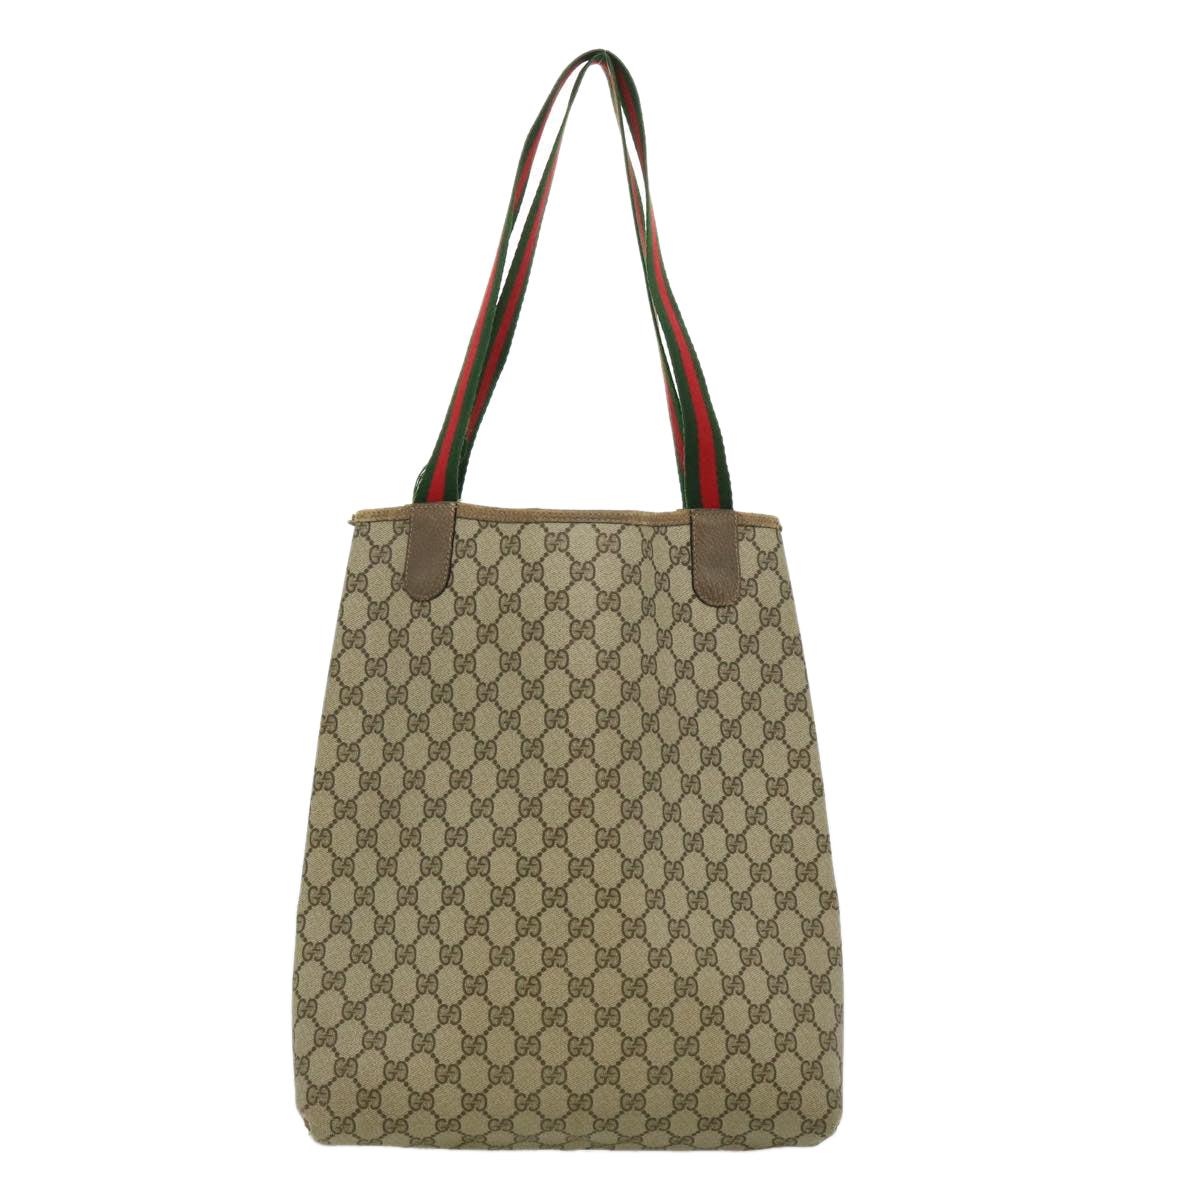 GUCCI GG Canvas Web Sherry Line Tote Bag Beige Red Green 3902003 Auth rd2376 - 0